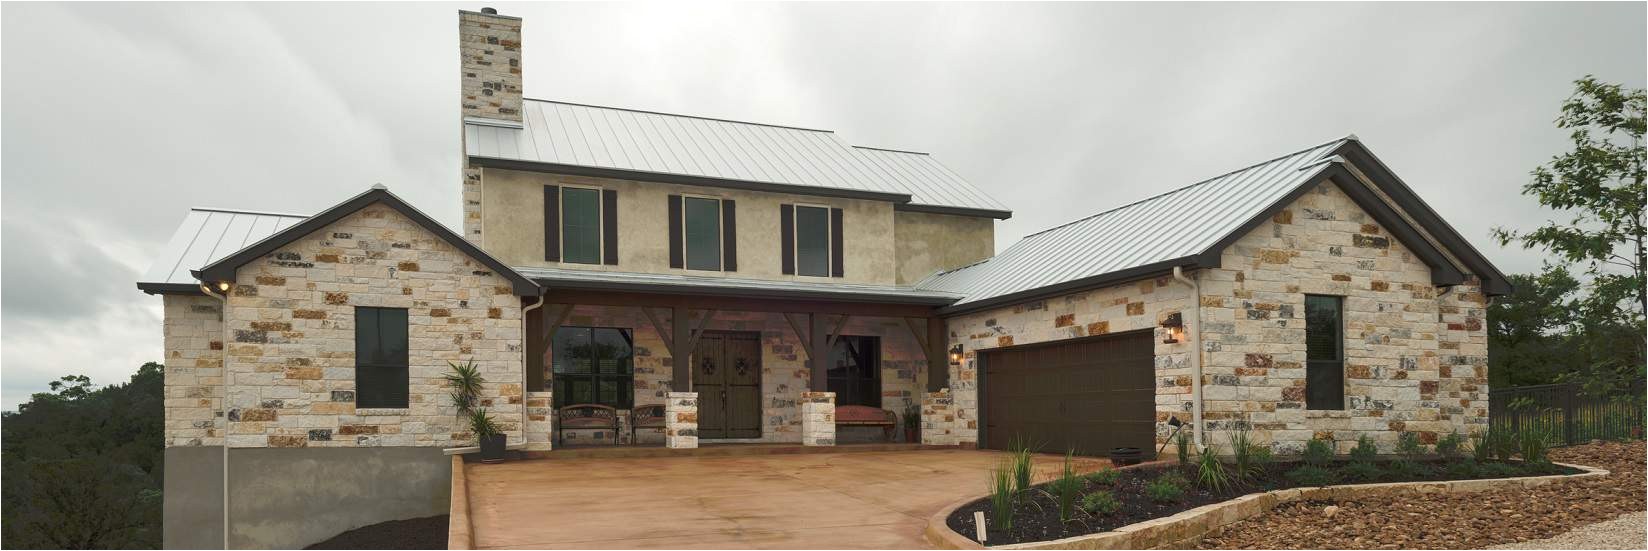 Custom Home Plans and Cost to Build Custom Home Builder New Braunfels San Antonio Hill